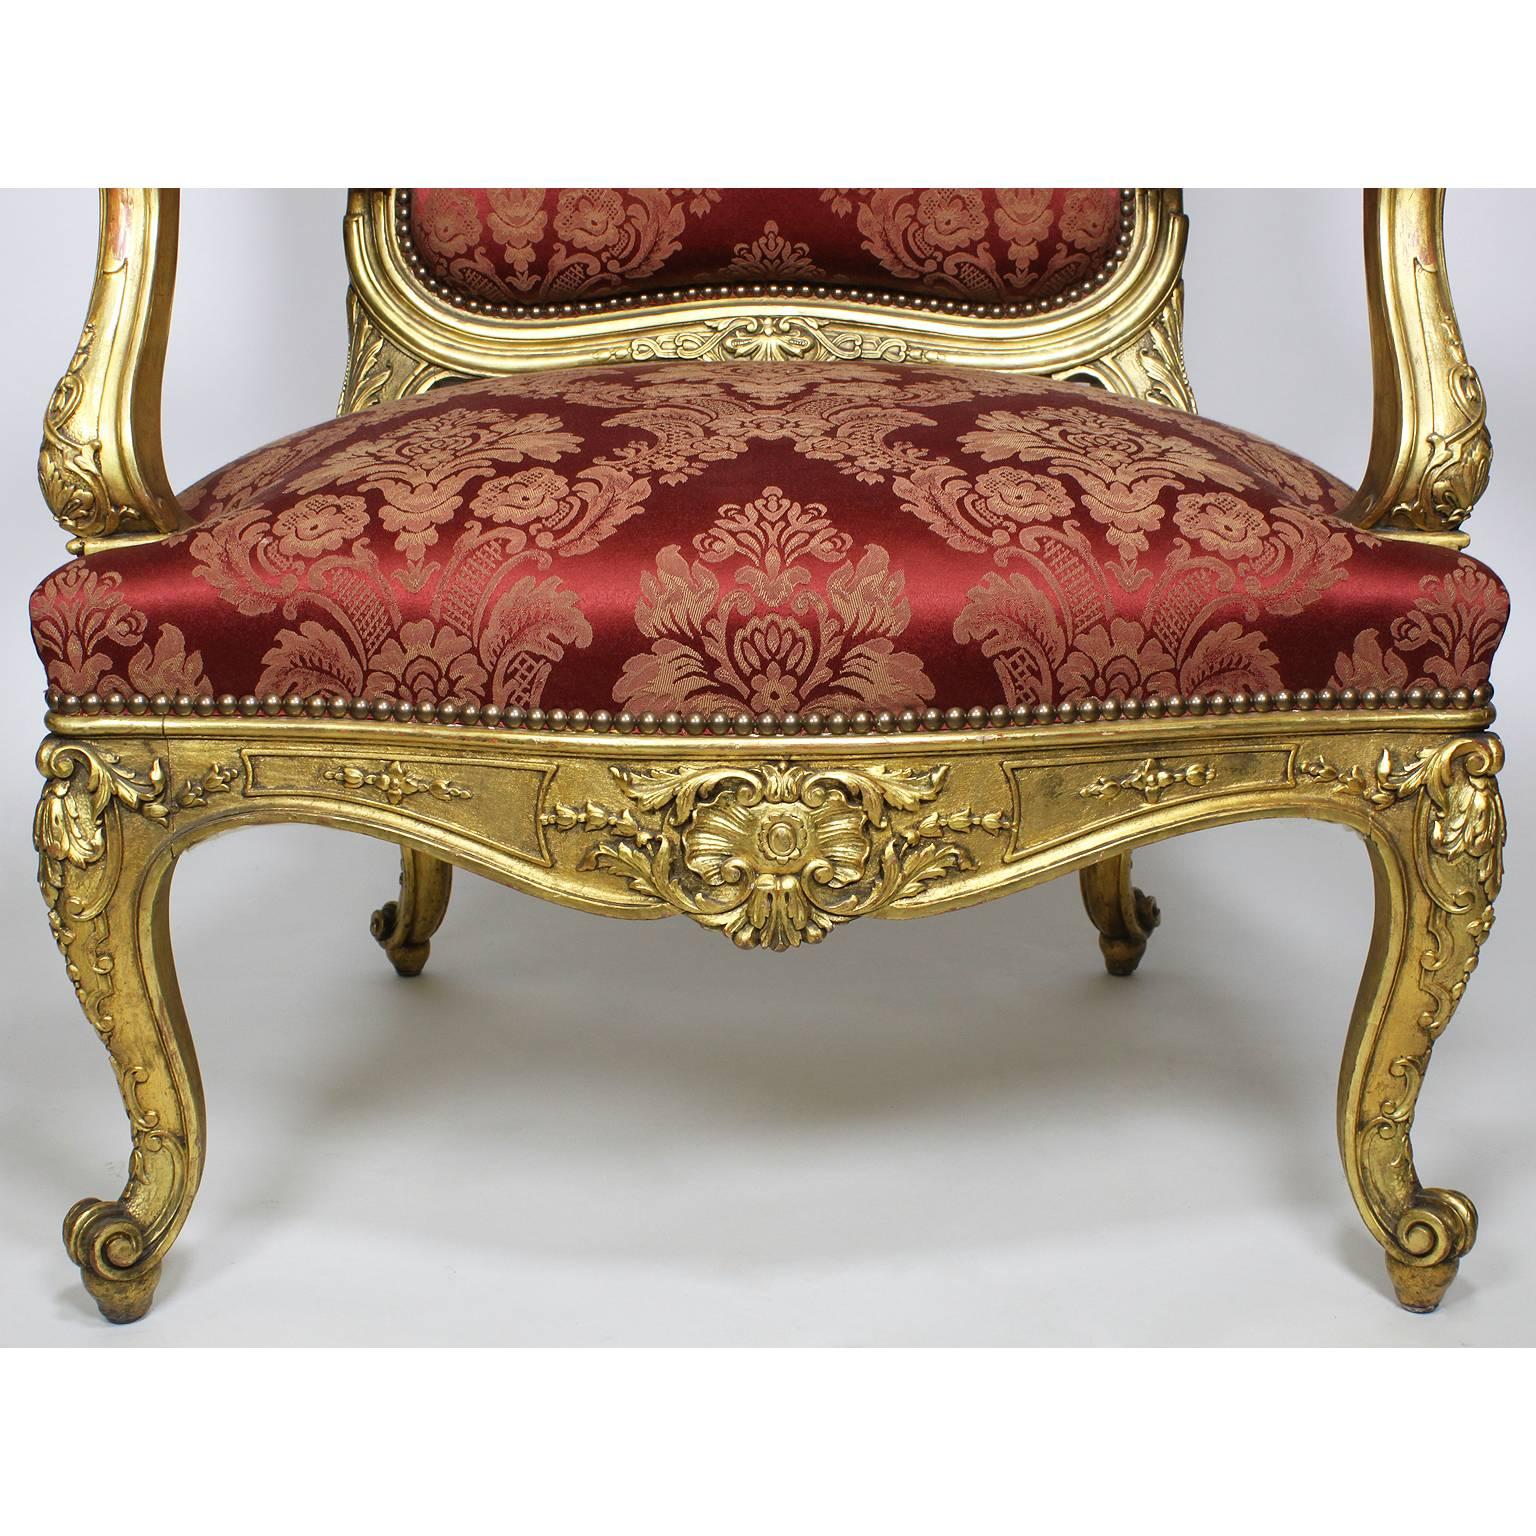 Palatial 19th Century Louis XV Style Giltwood Carved Three-Piece Salon Suite For Sale 2